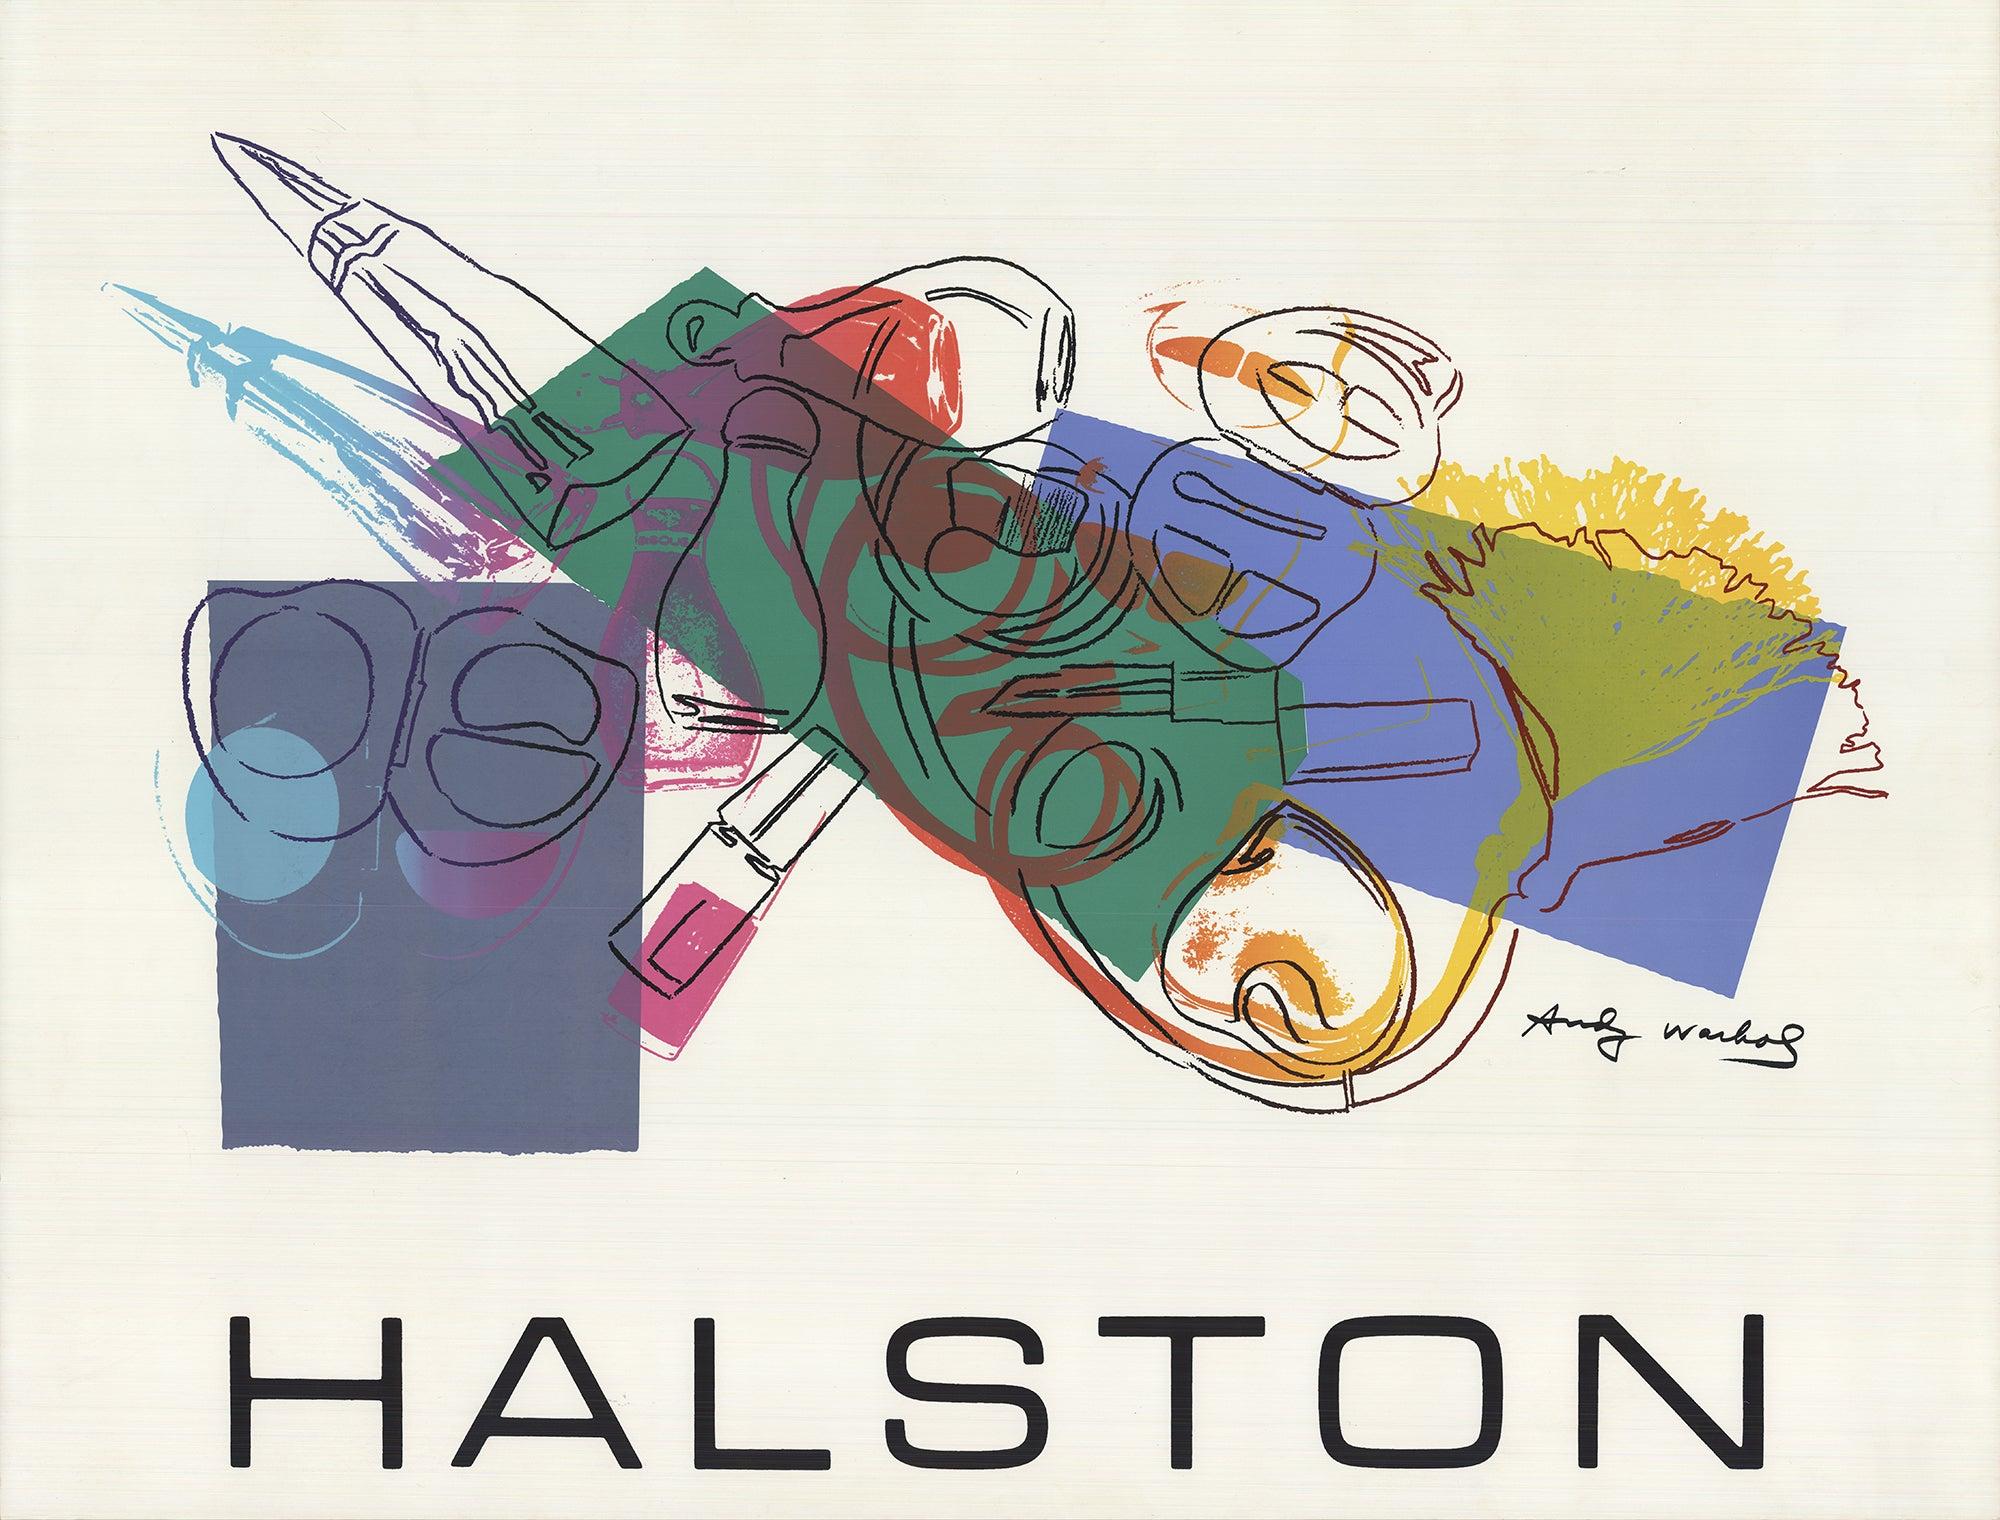 ANDY WARHOL Halston Advertising Campaign Poster, 1982 - Print by Andy Warhol